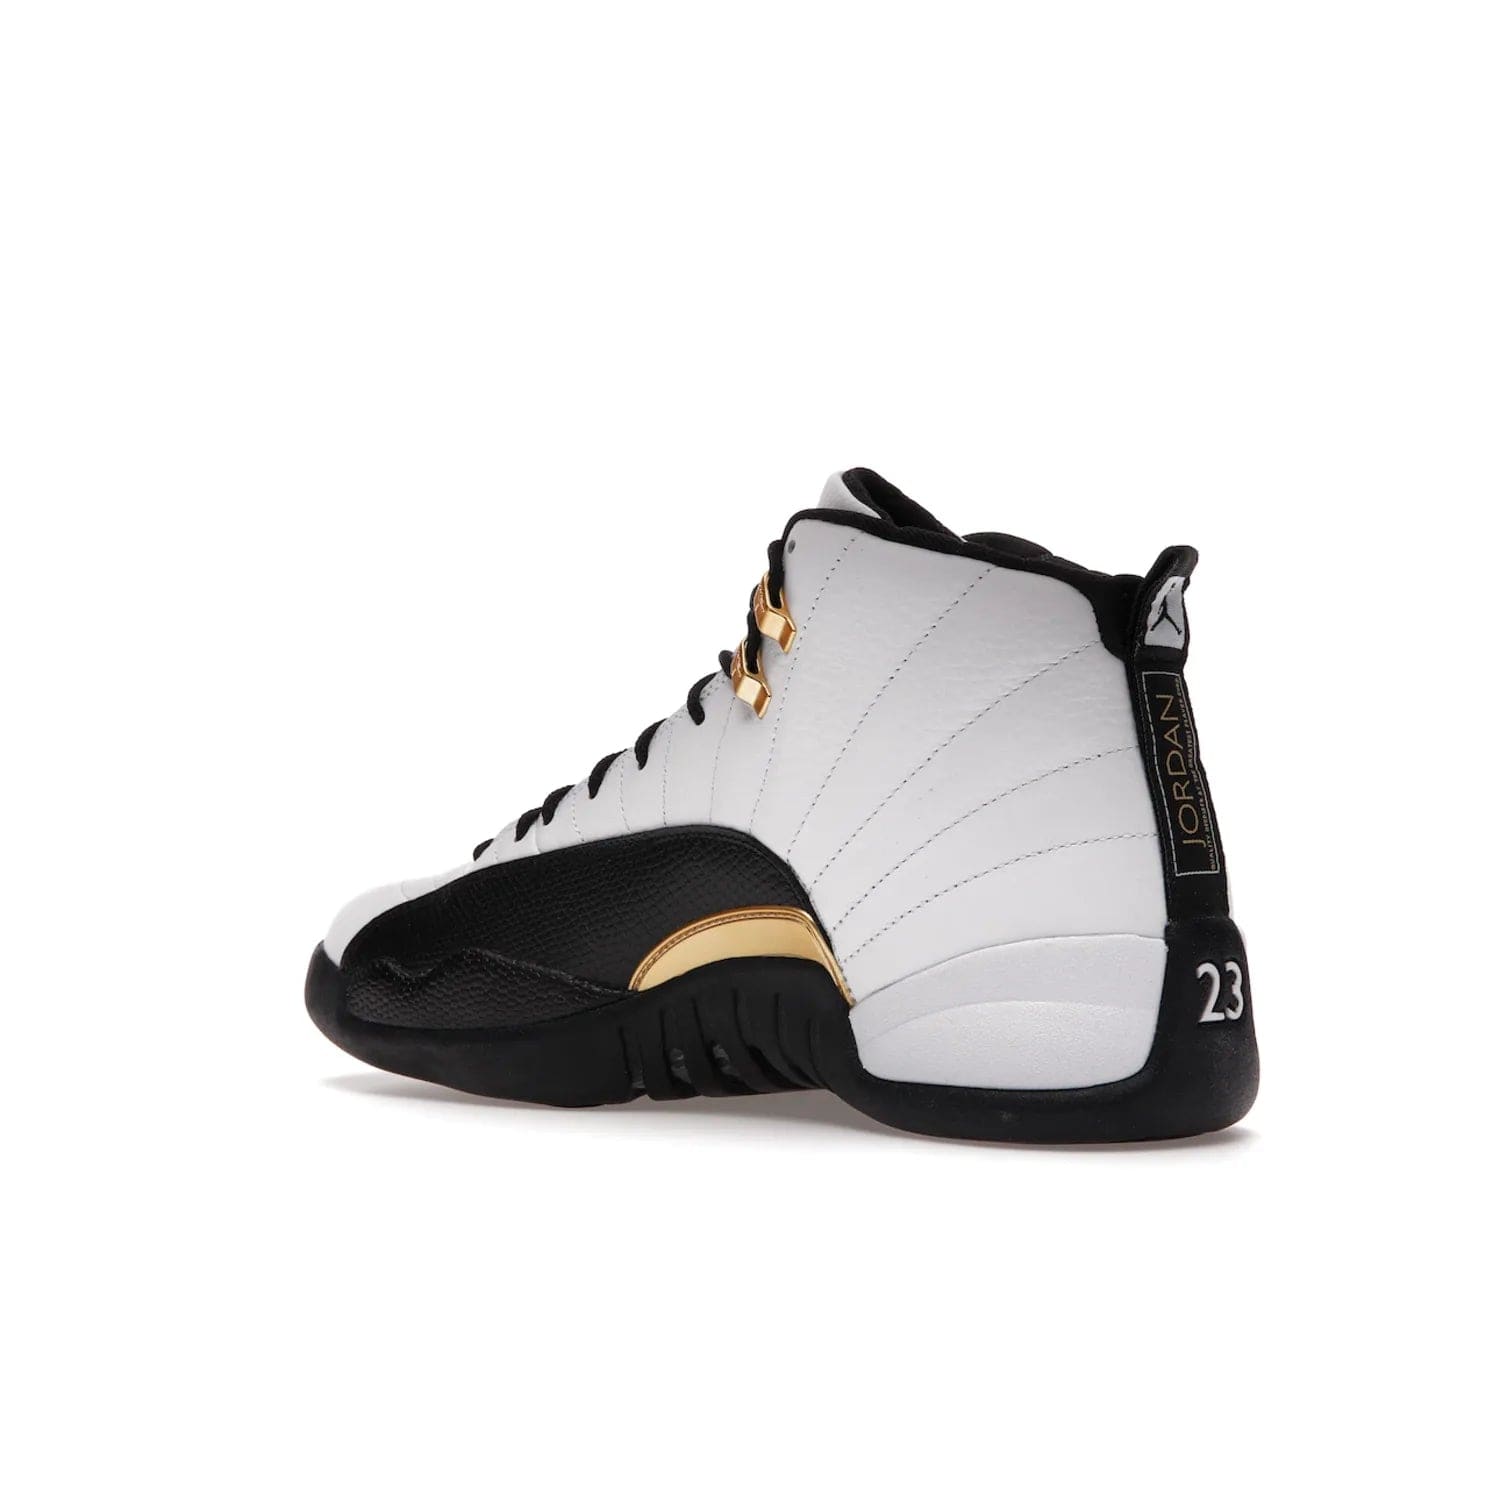 Jordan 12 Retro Royalty Taxi - Image 23 - Only at www.BallersClubKickz.com - Make a statement with the Air Jordan 12 Retro Royalty Taxi. Woven heel tag, gold plaquet, white tumbled leather upper plus a black toe wrap, make this modern take on the classic a must-have. Available in November 2021.